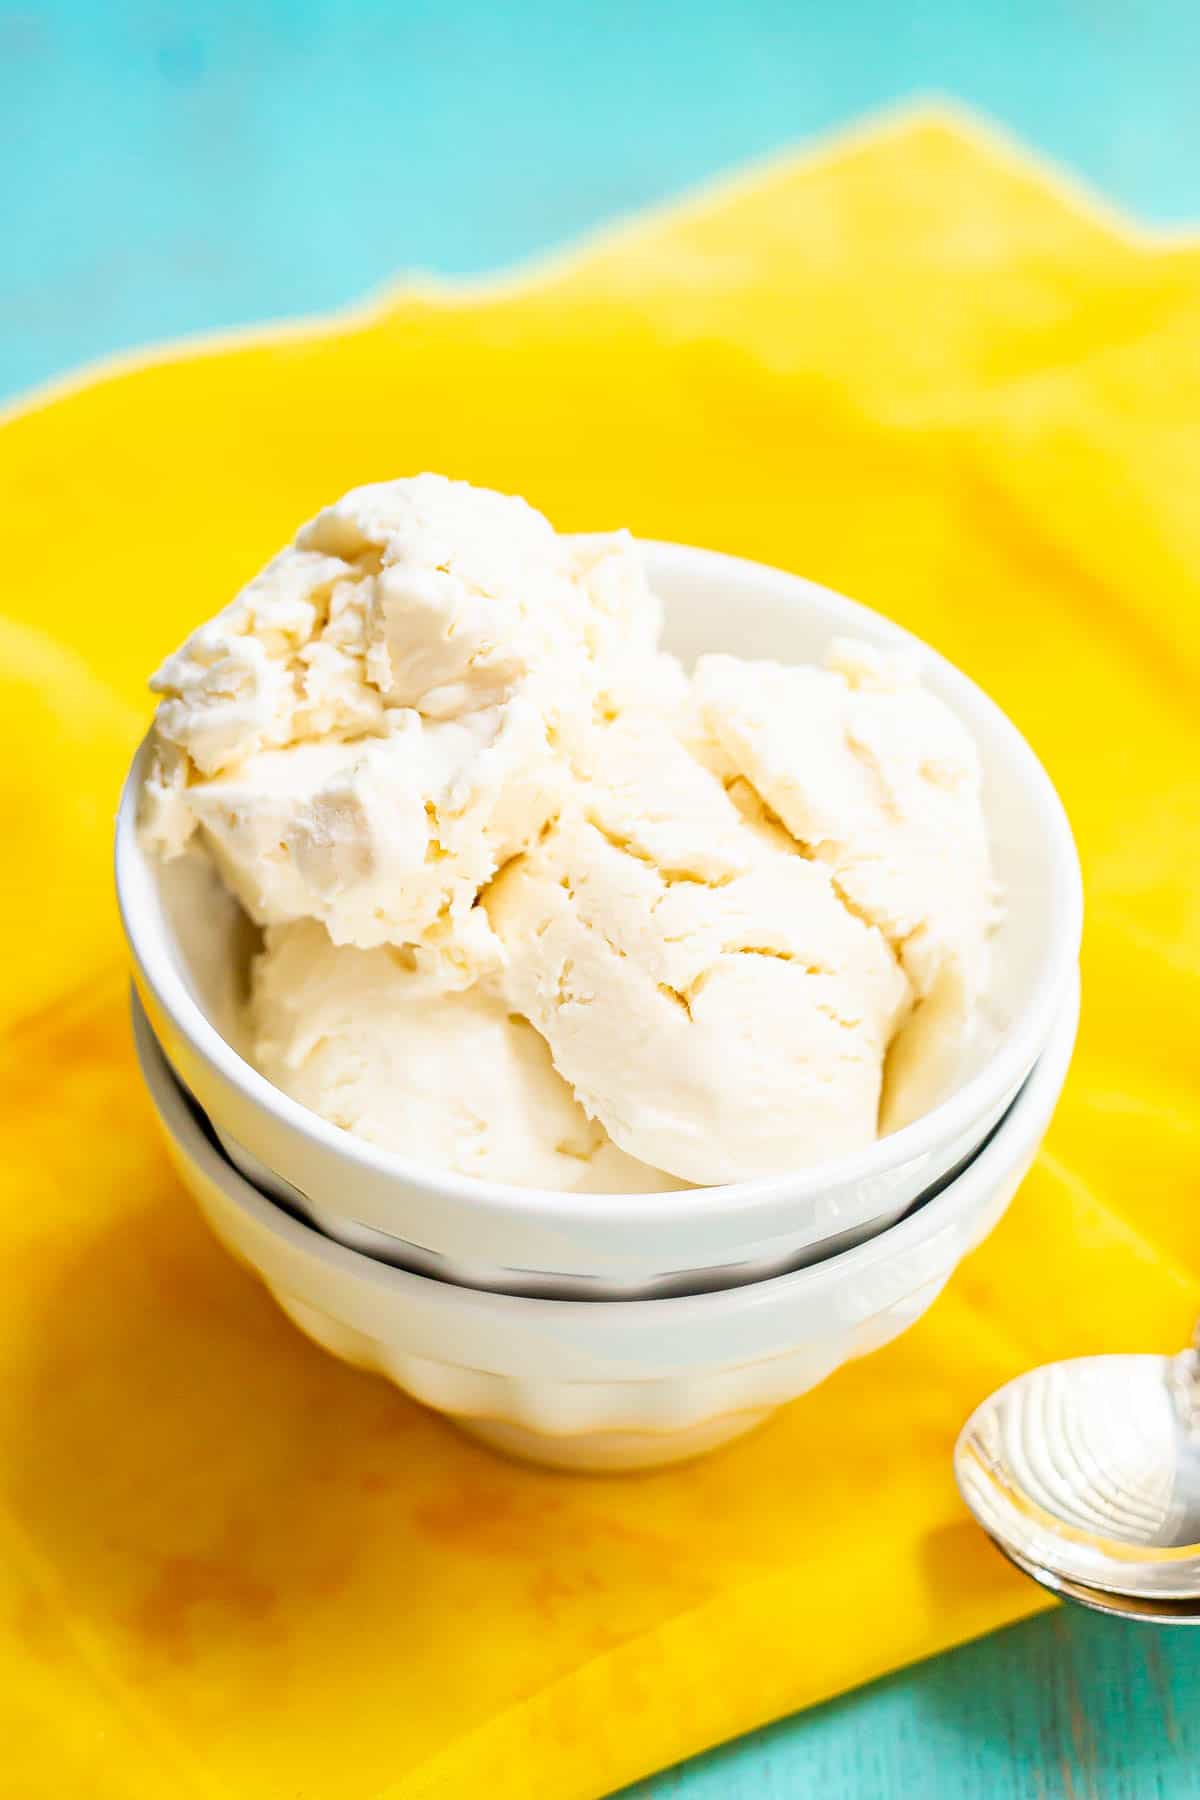 Vanilla ice cream served in a stacked white bowl on a yellow fabric with spoons nearby.